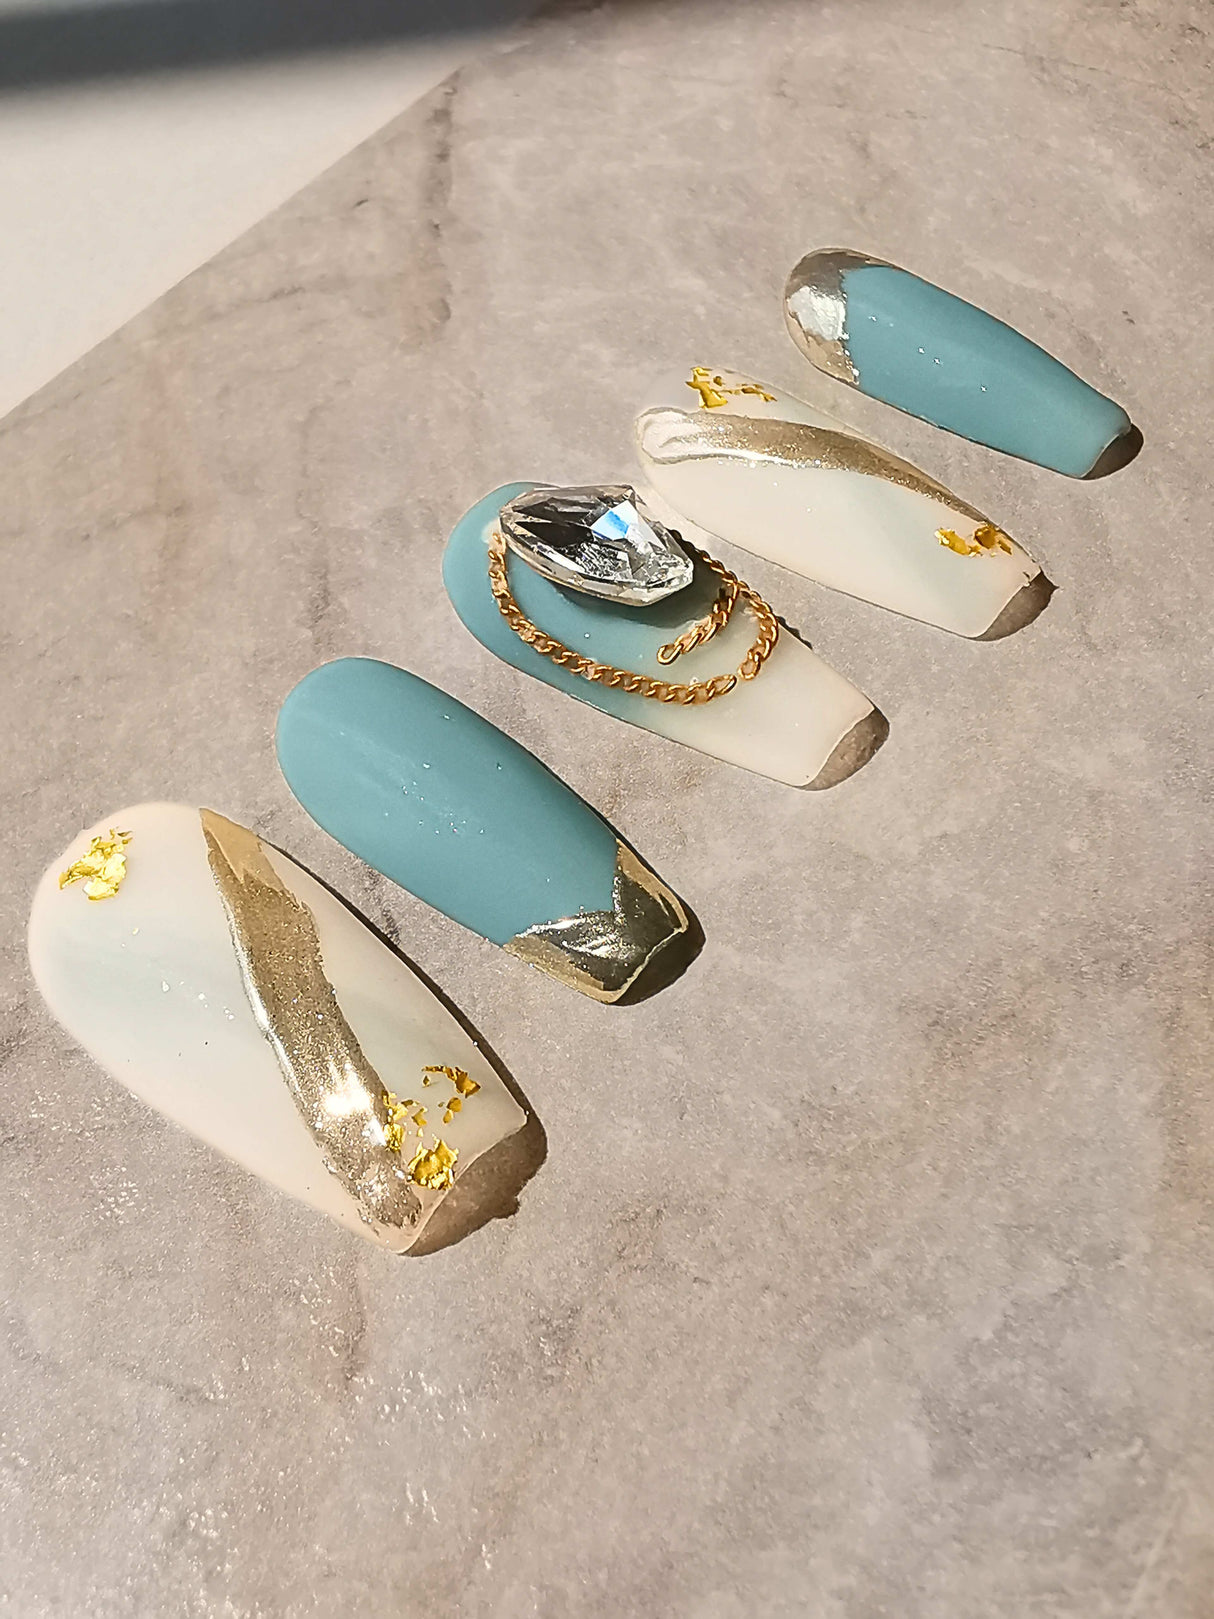 Luxurious and cute nails with a dual-color scheme, gold metallic foil accents, rhinestone embellishment, and mix of textures for special occasions.